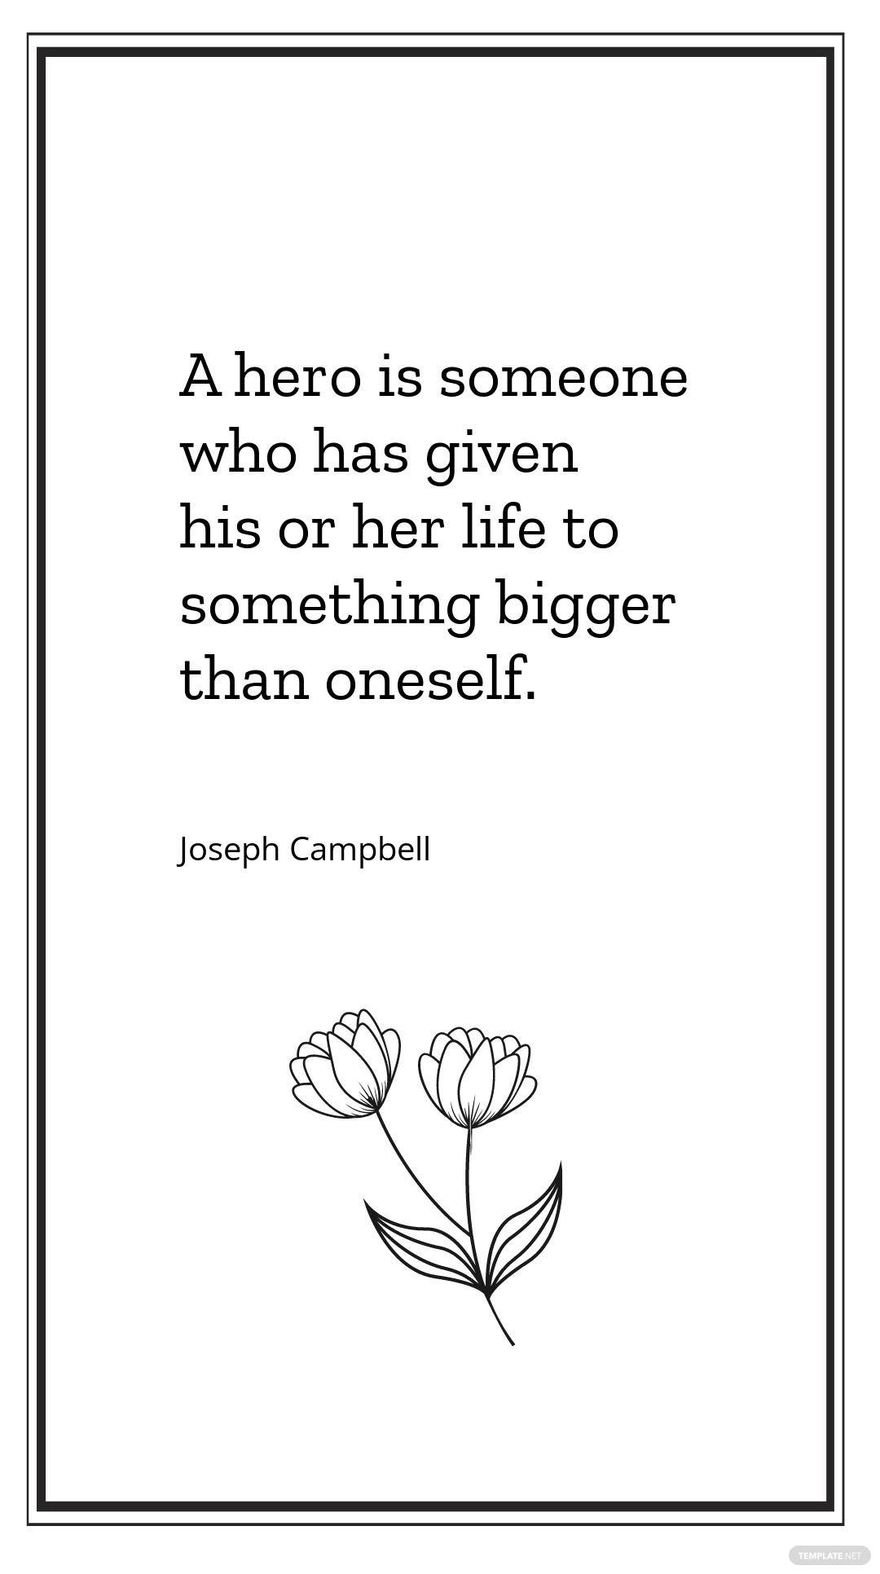 Joseph Campbell - A hero is someone who has given his or her life to something bigger than oneself.